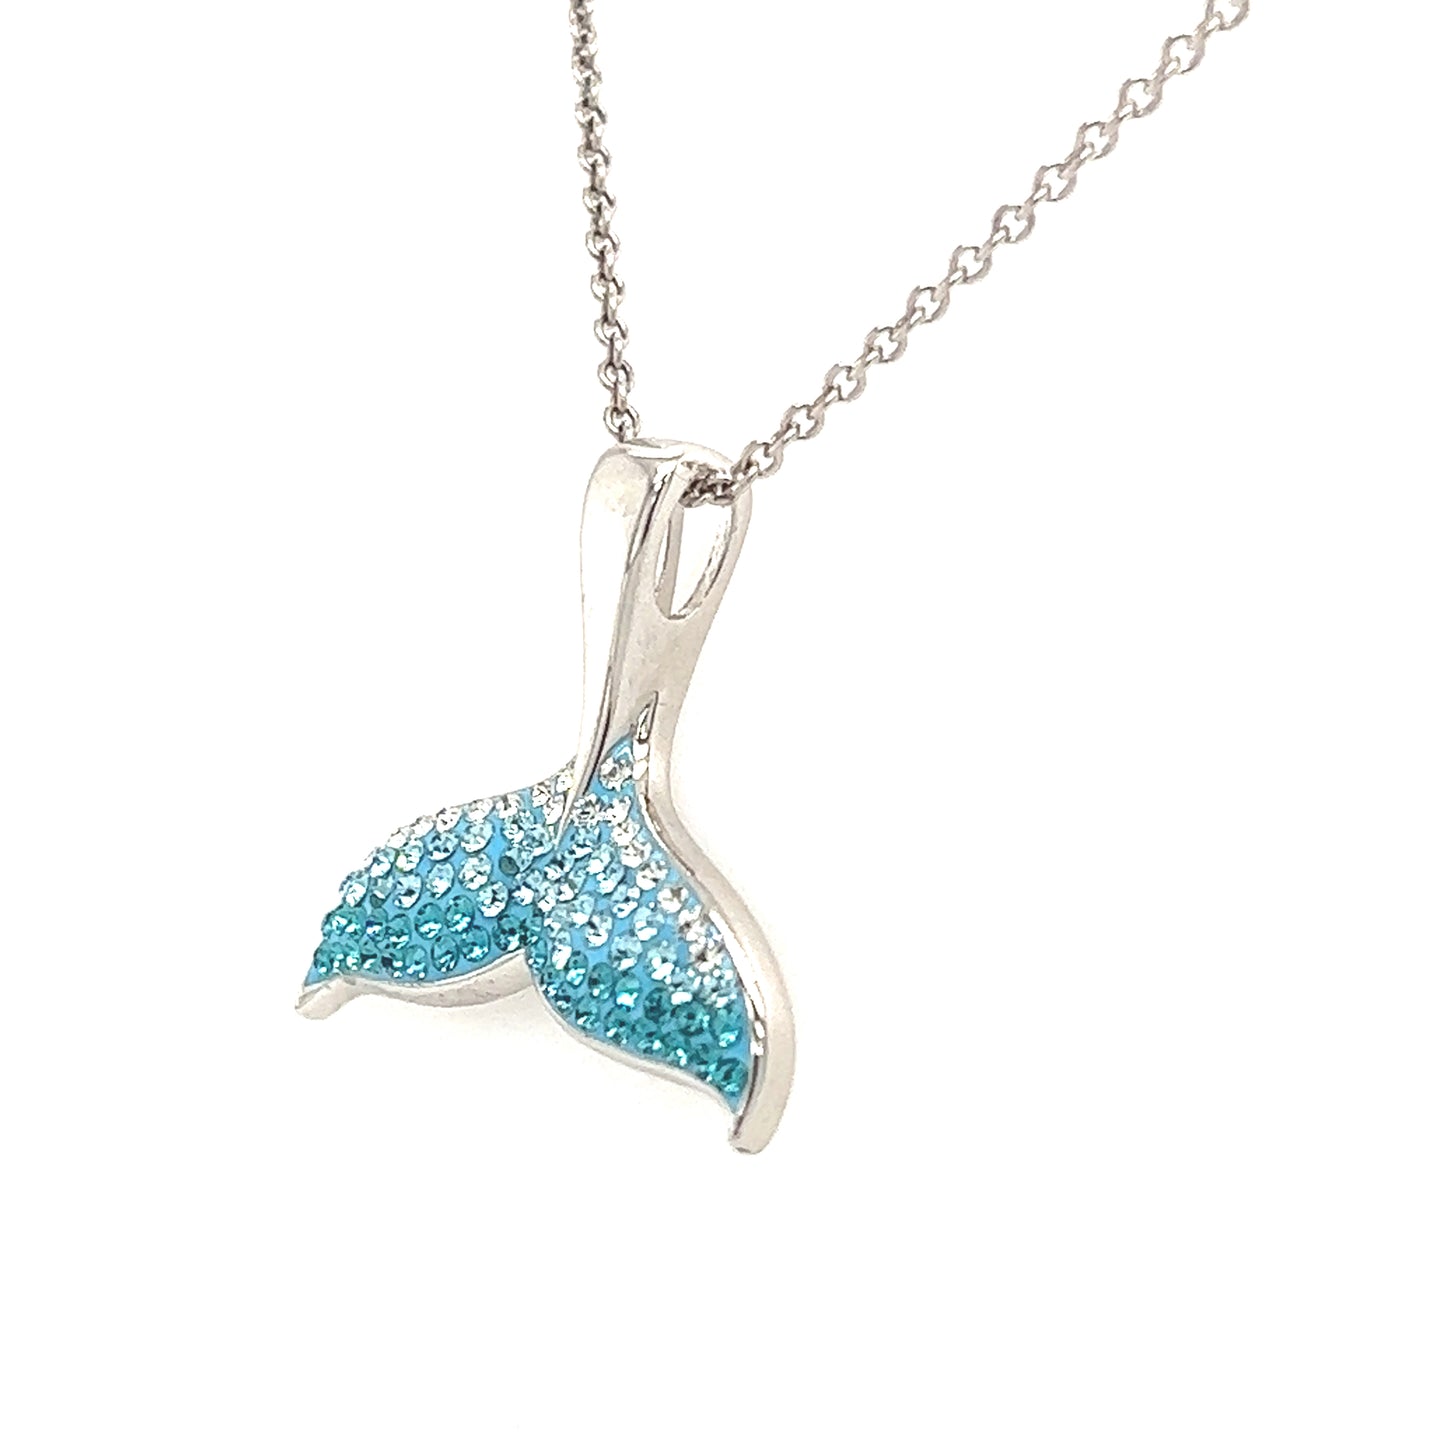 Whale Tail Necklace with Aqua Crystals in Sterling Silver Left Side View